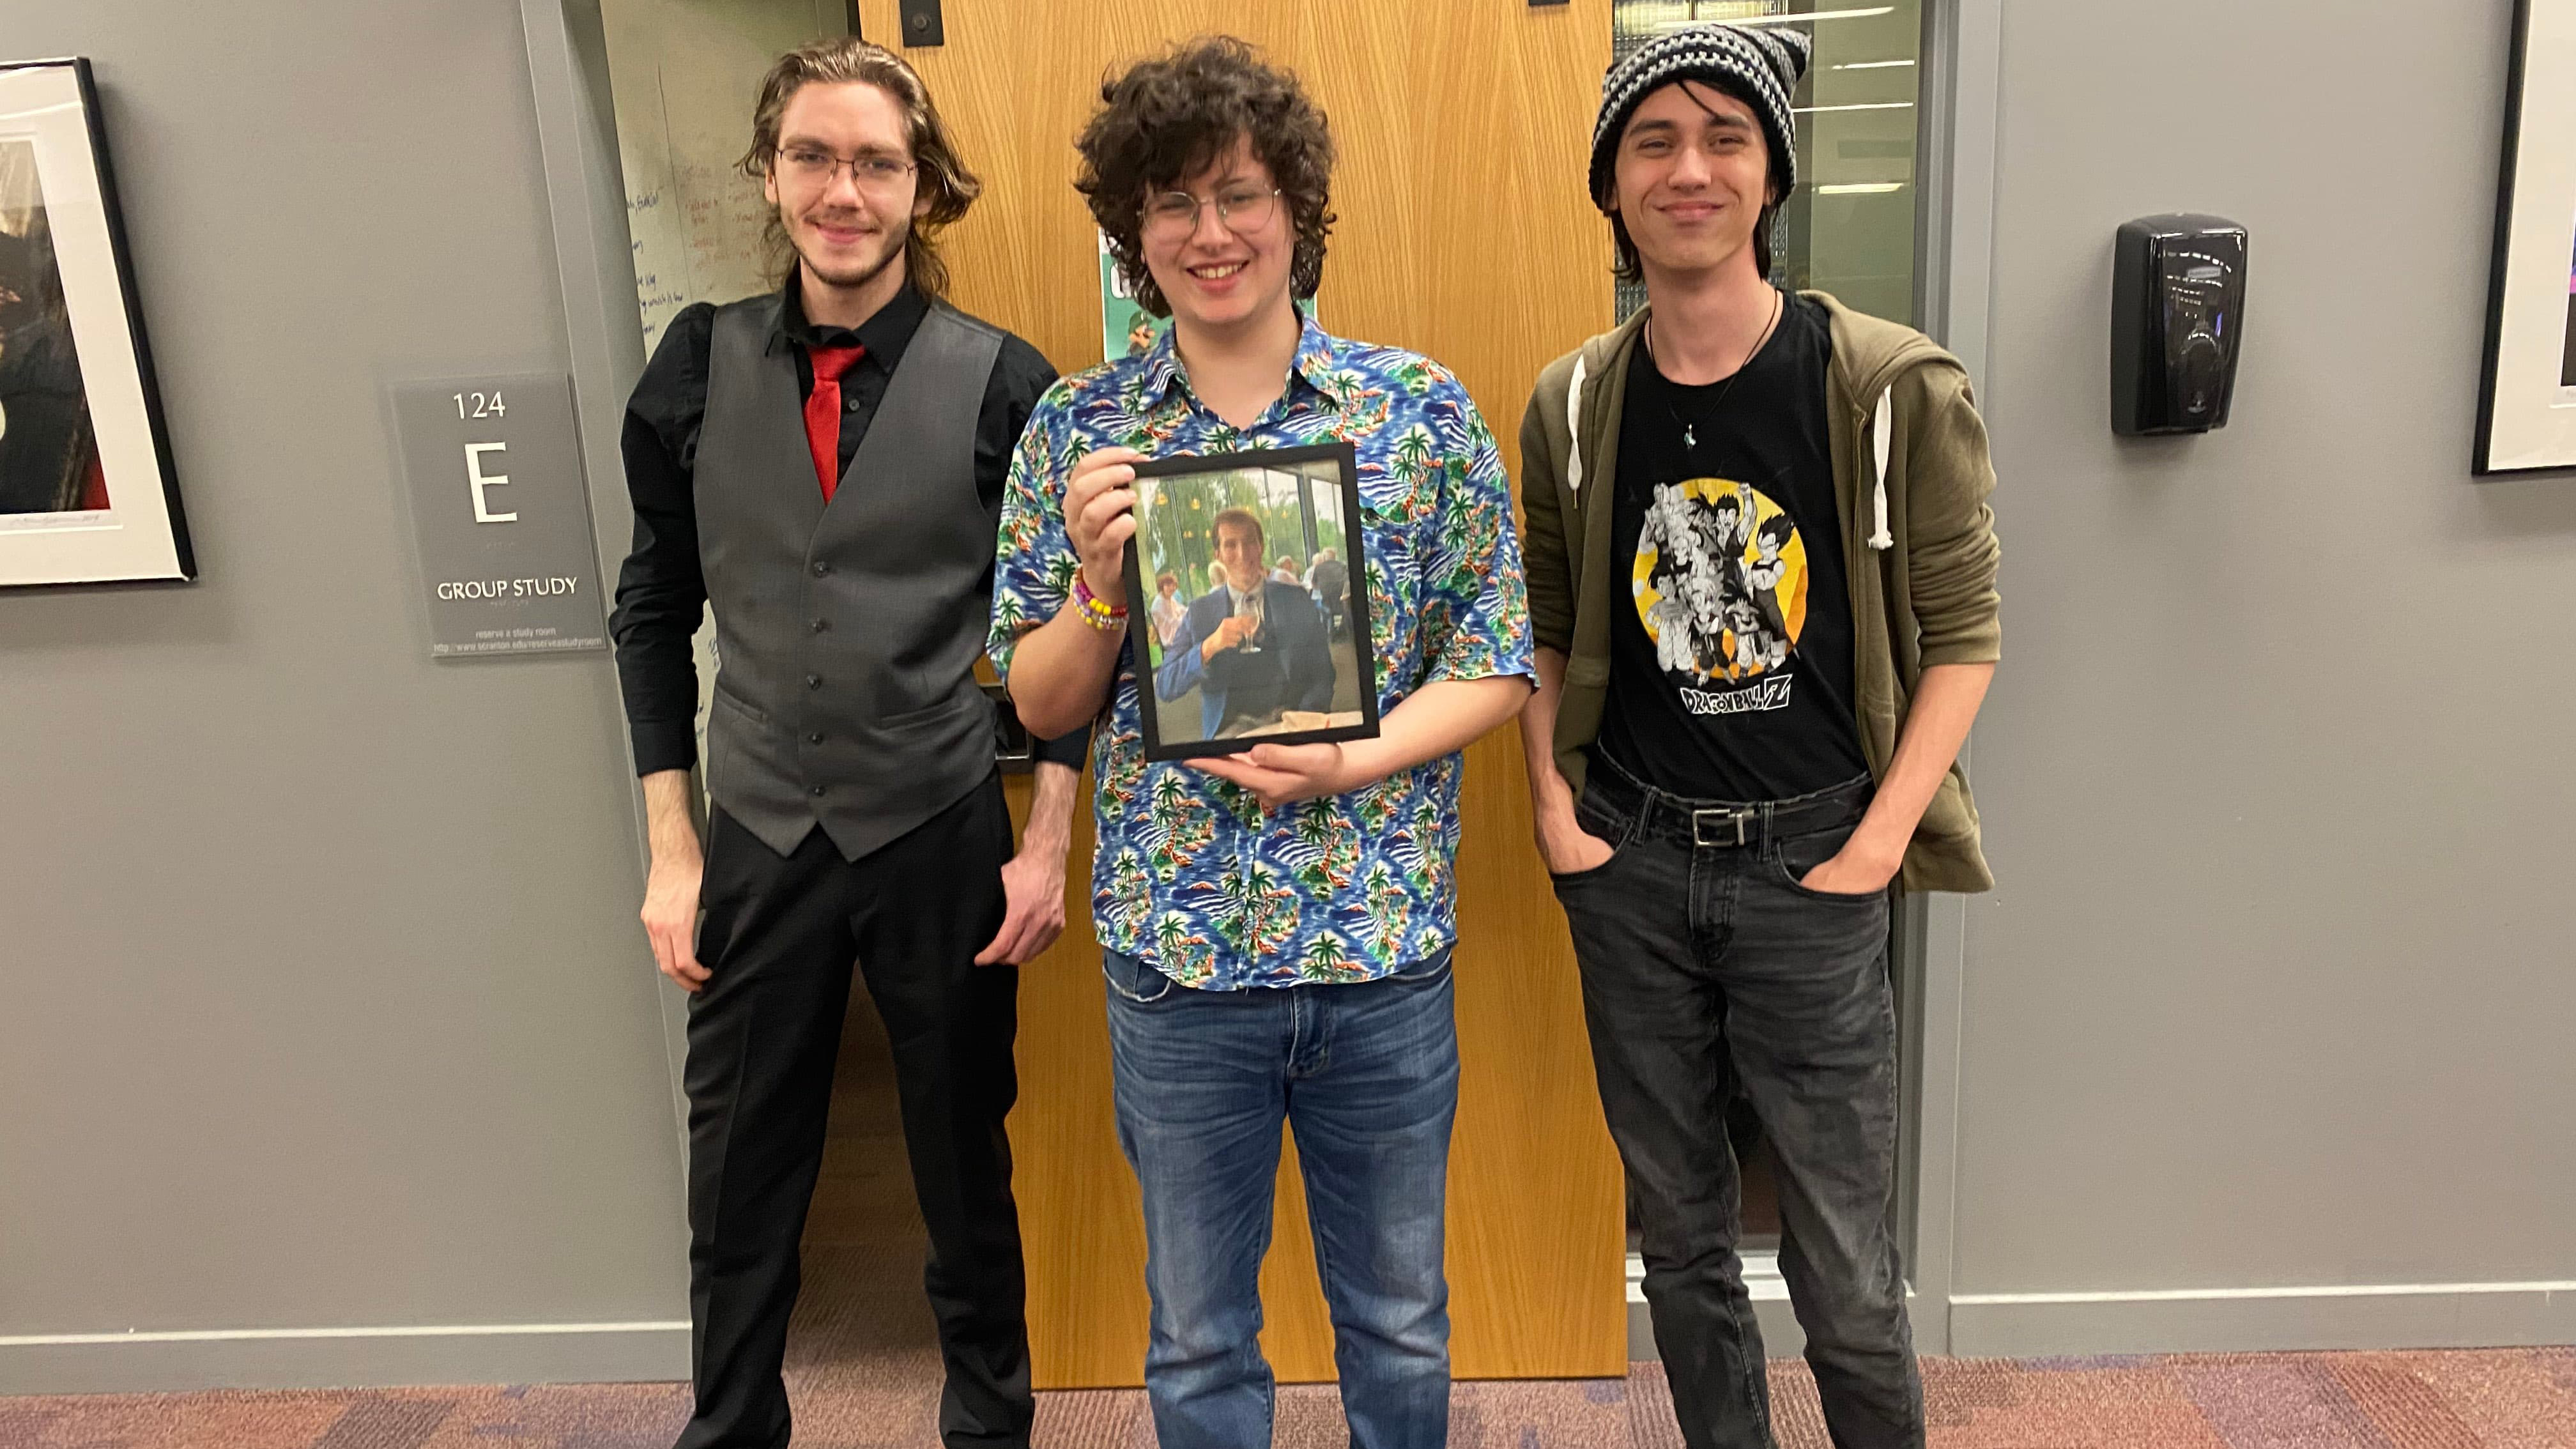 Winners of the Super Smash Brothers Tournaments, from left, are James B Davis IV, Caillou Kaneski, Terry Torres. In the framed photograph is Gaming Club Vice President Luke Capper. 